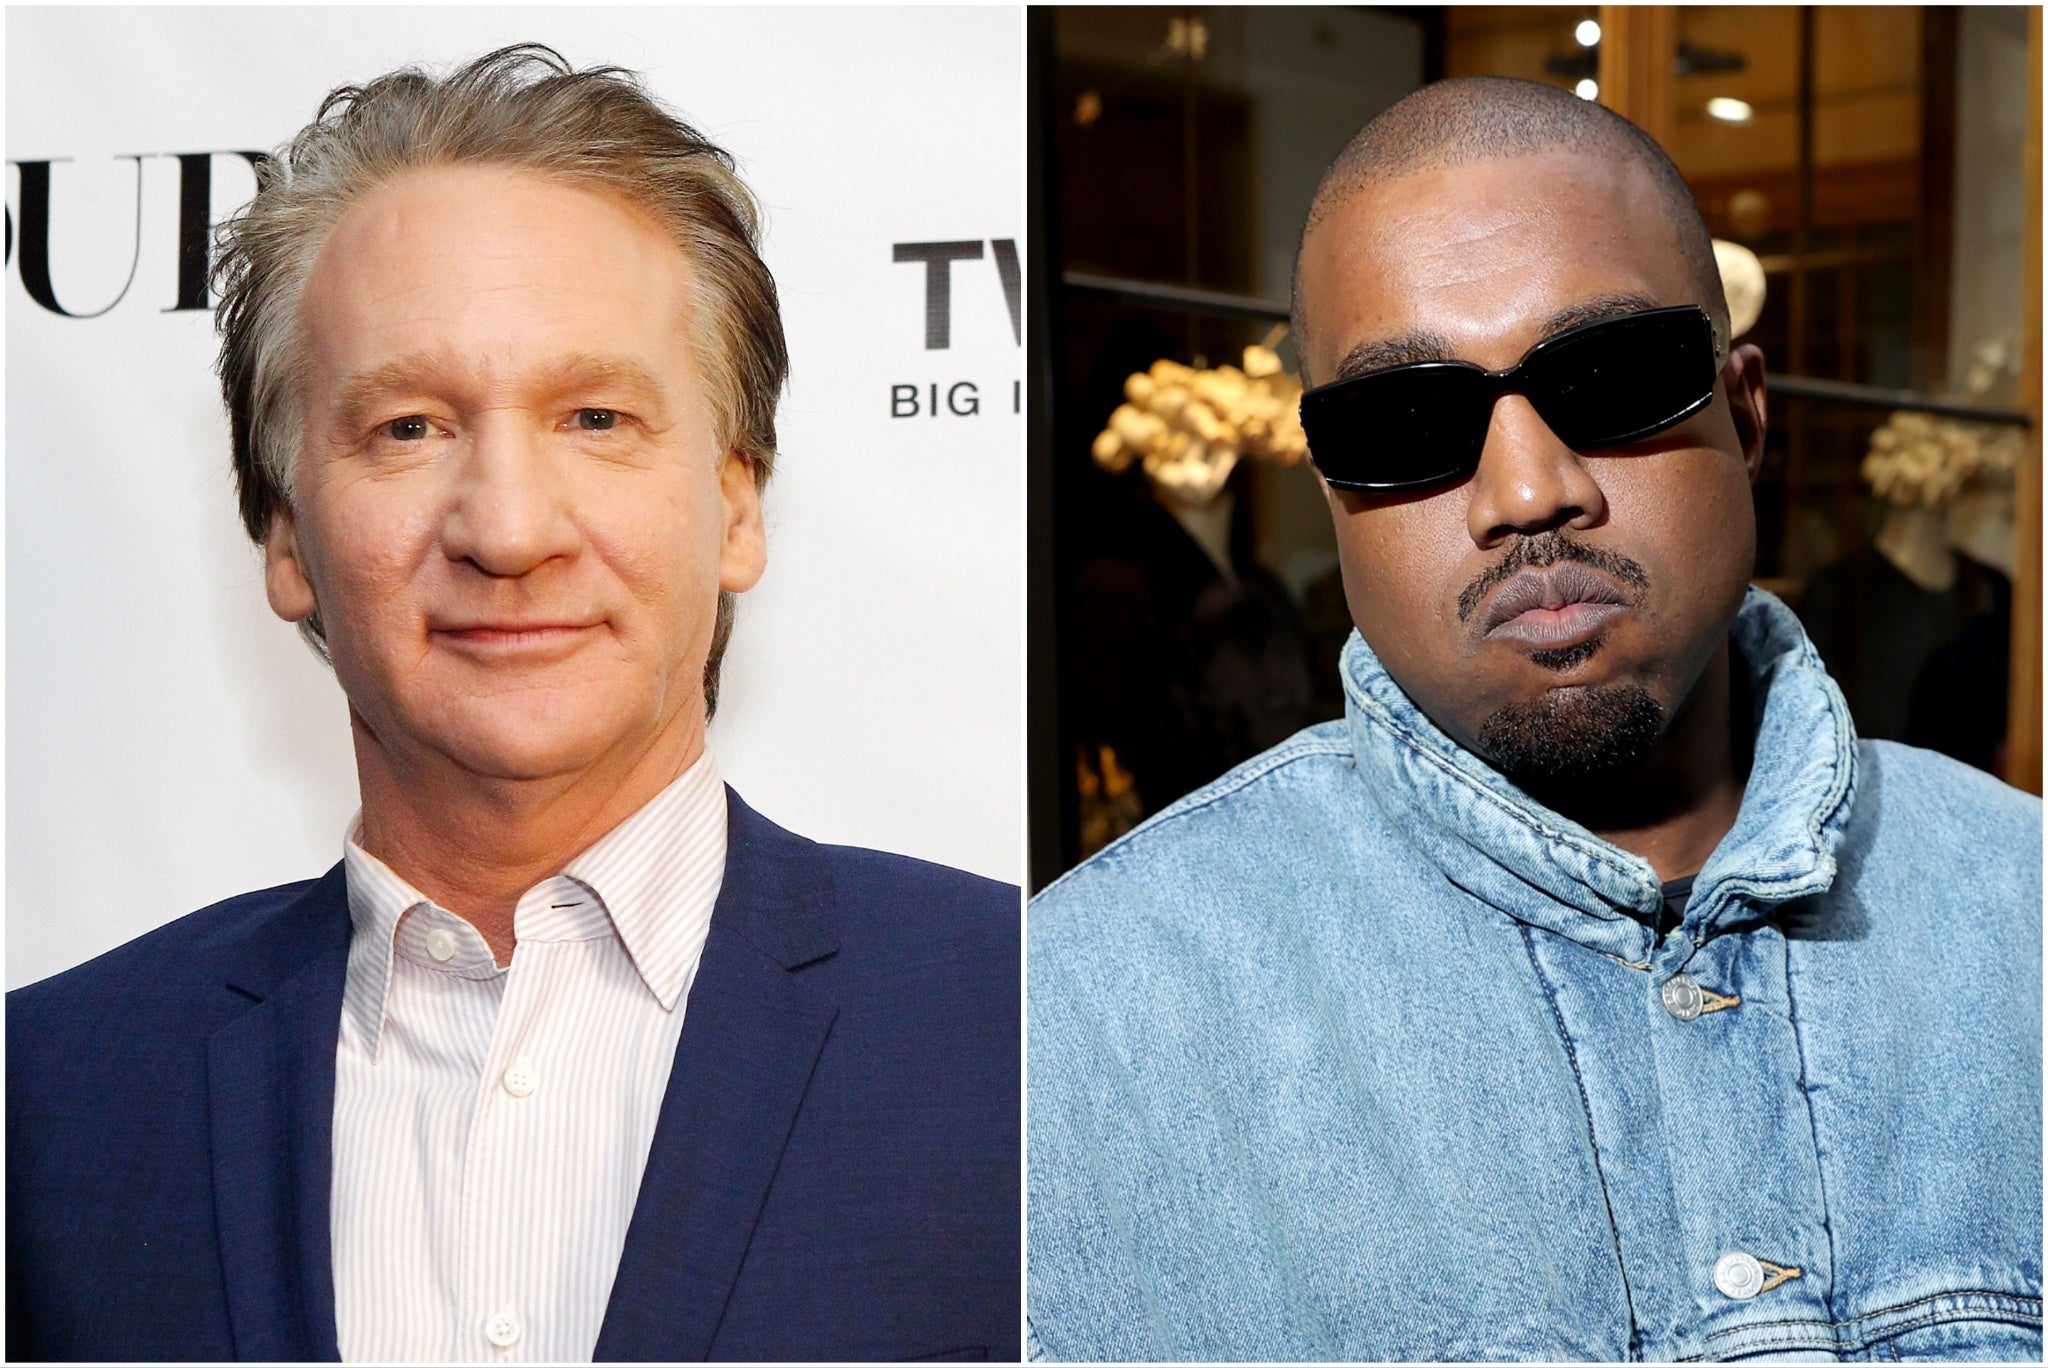 Late-night host Bill Maher scrapped a two-hour interview with Kanye West